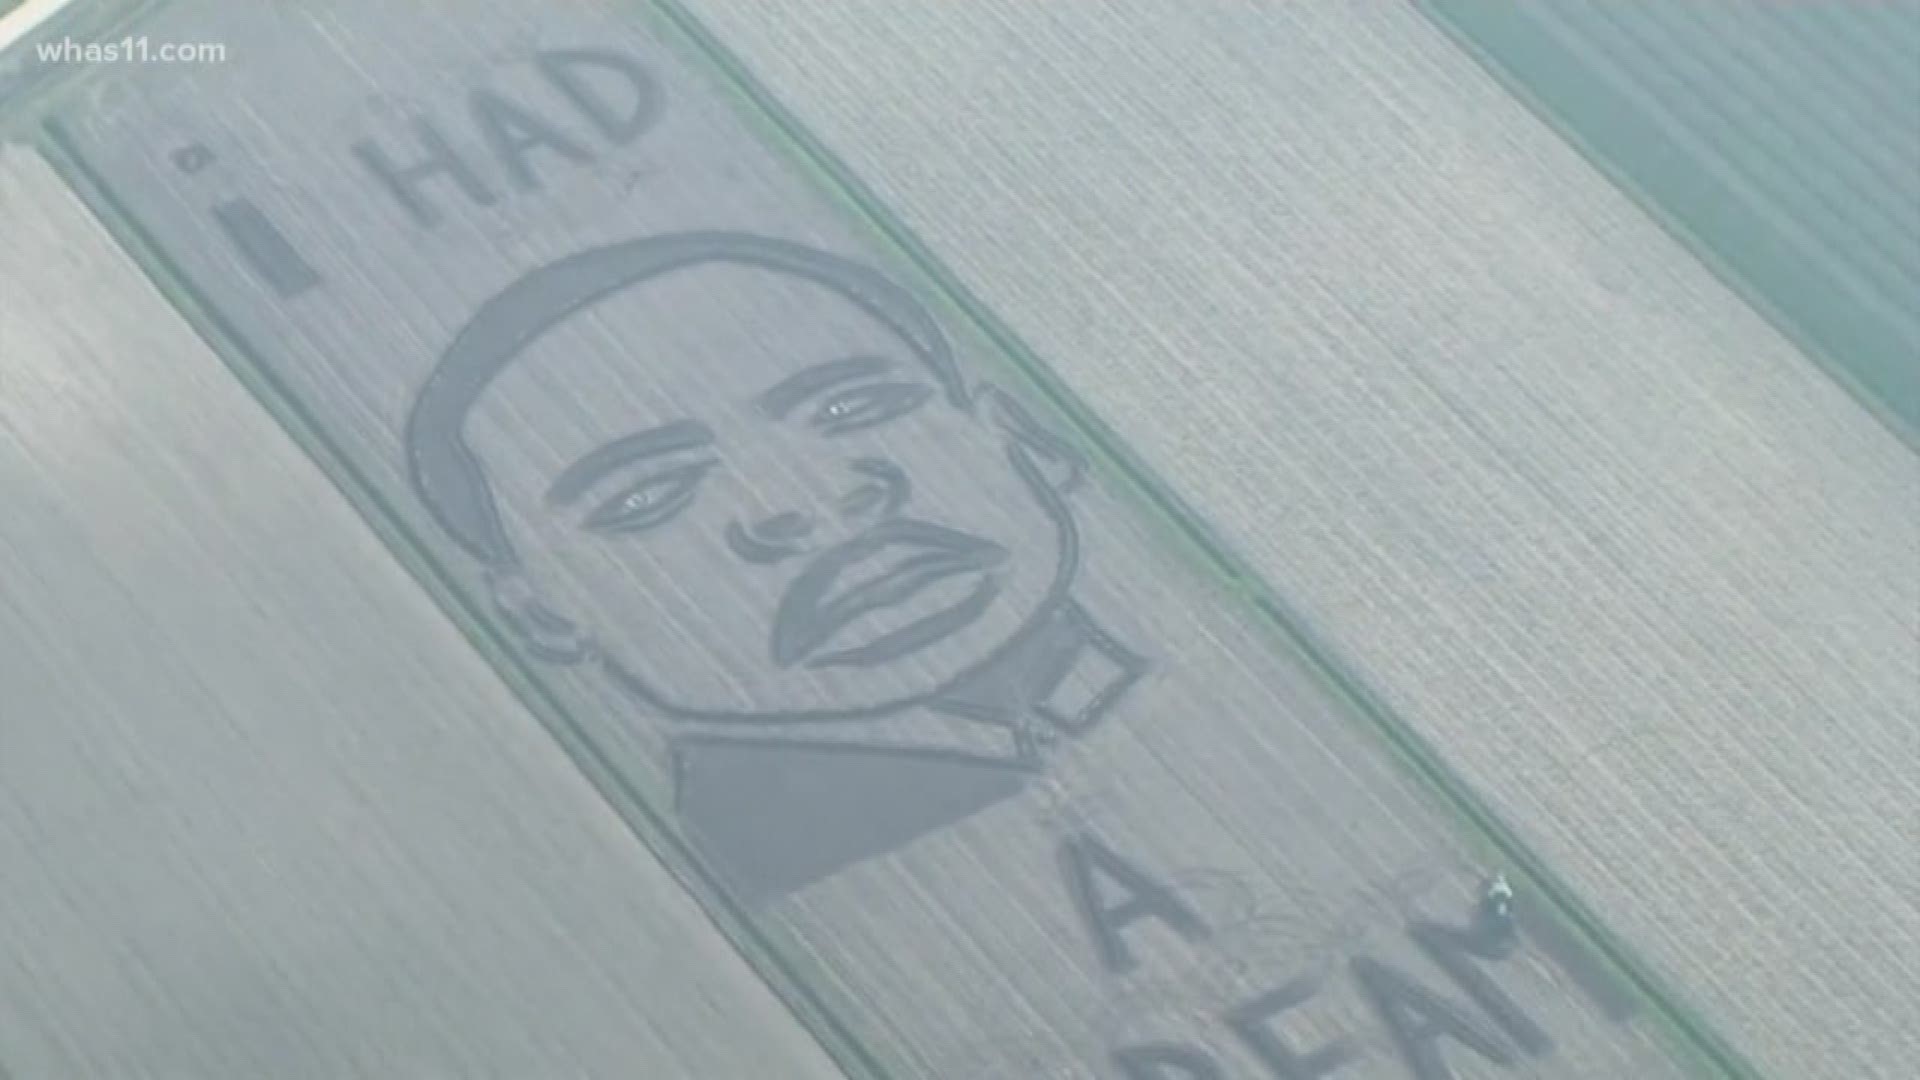 Land artist in Italy creates portrait of Martin Luther King, Jr.